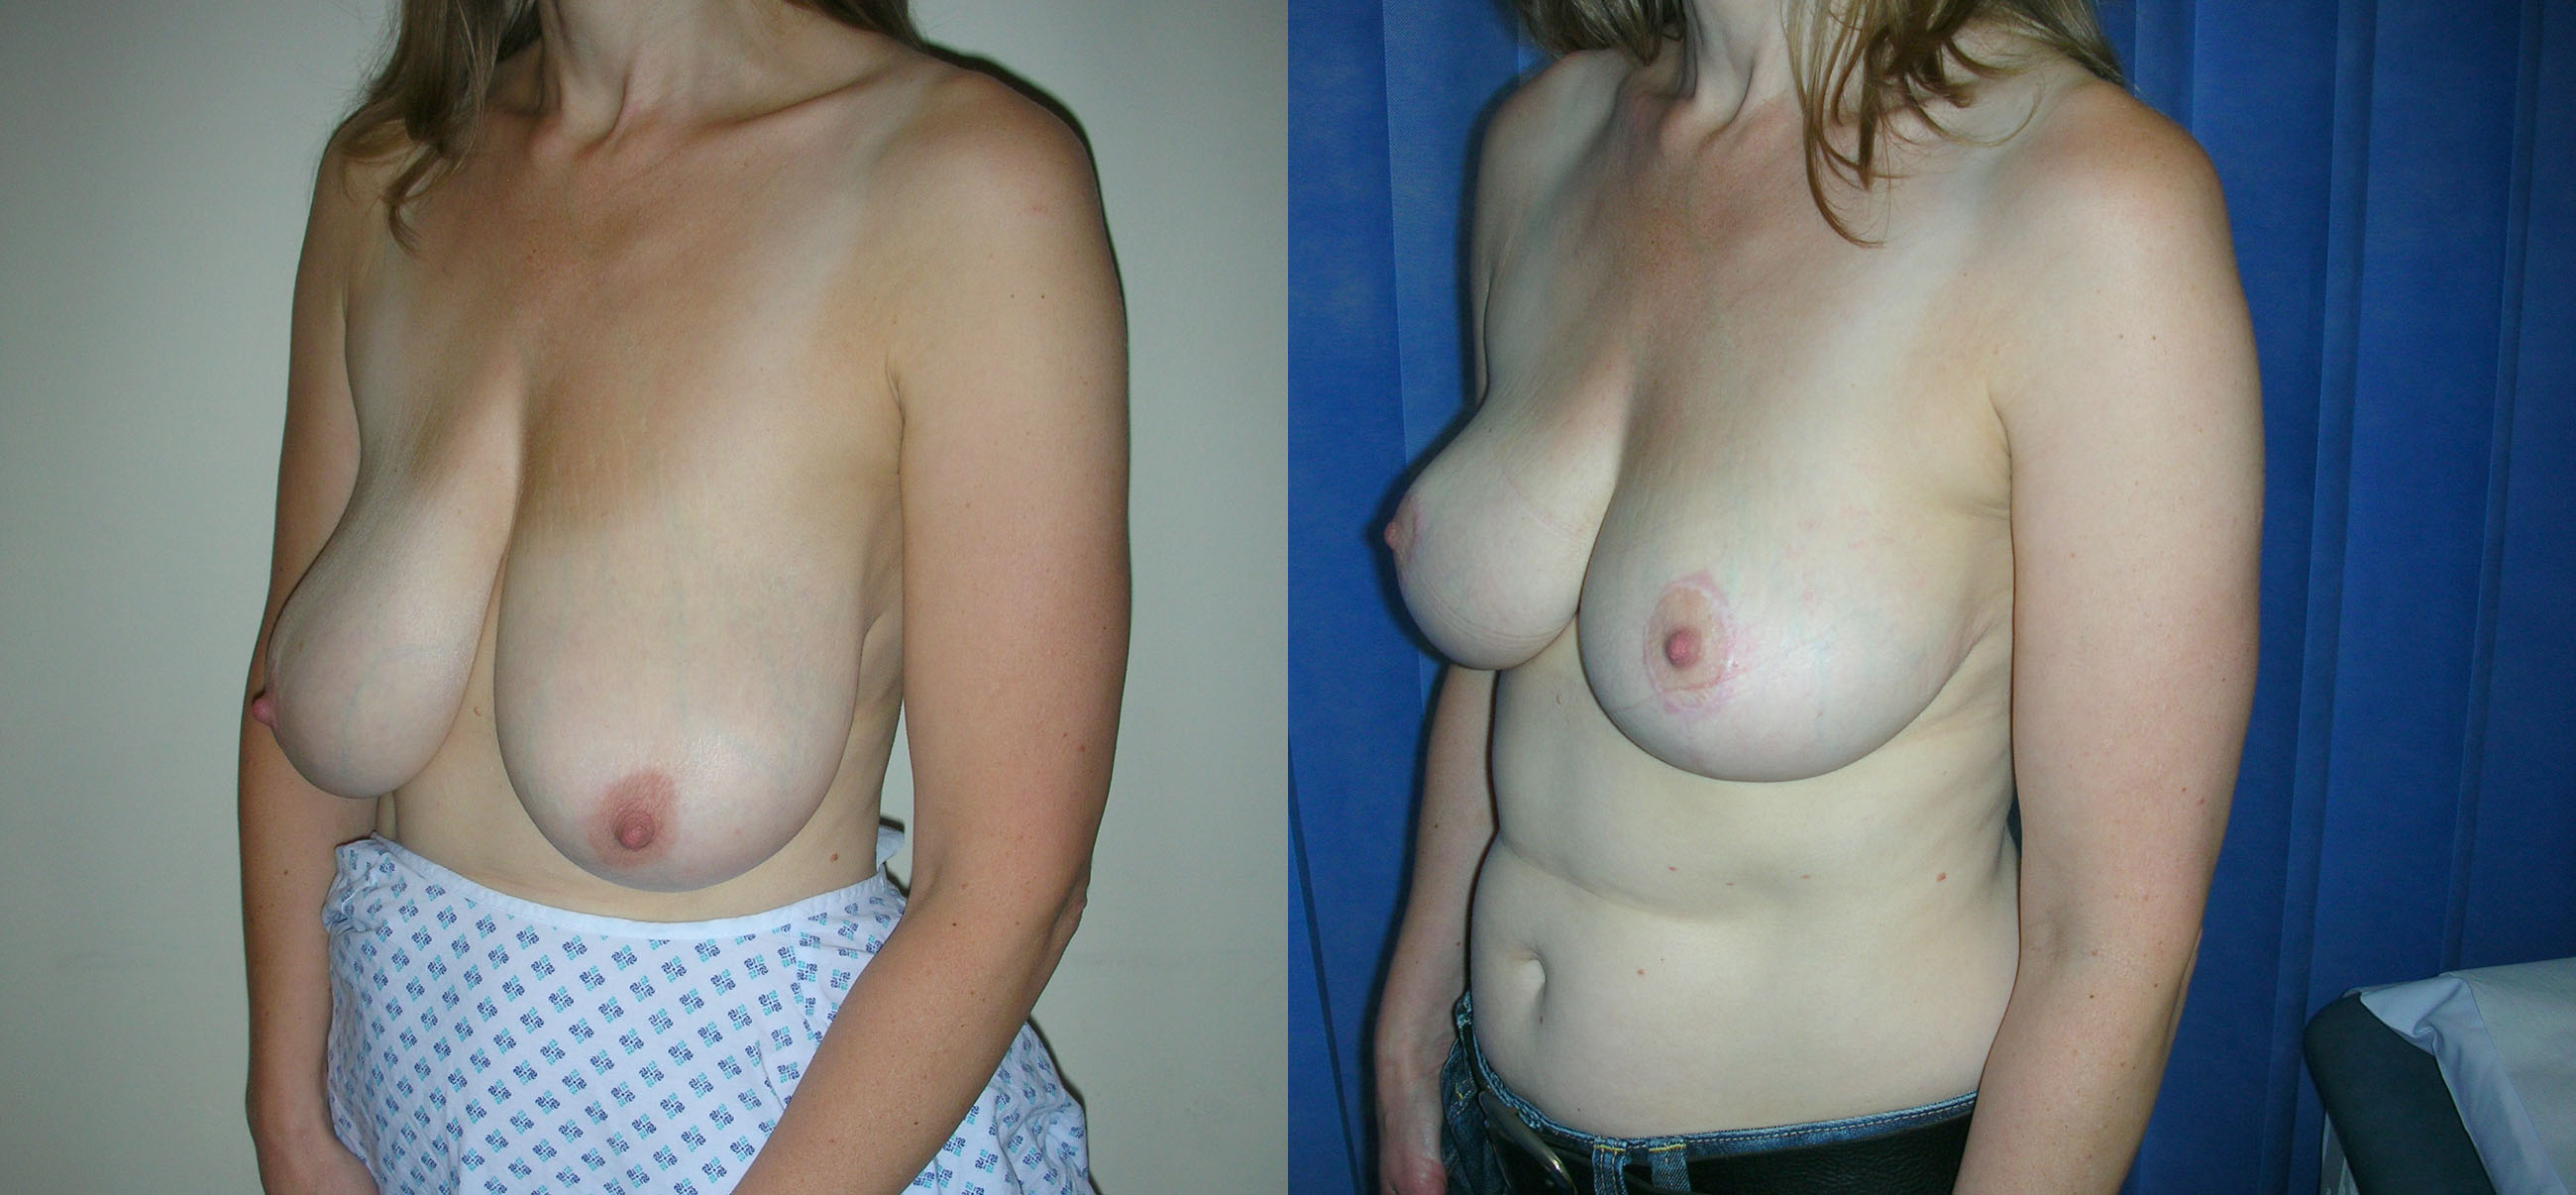 Breast Reduction Manchester and London